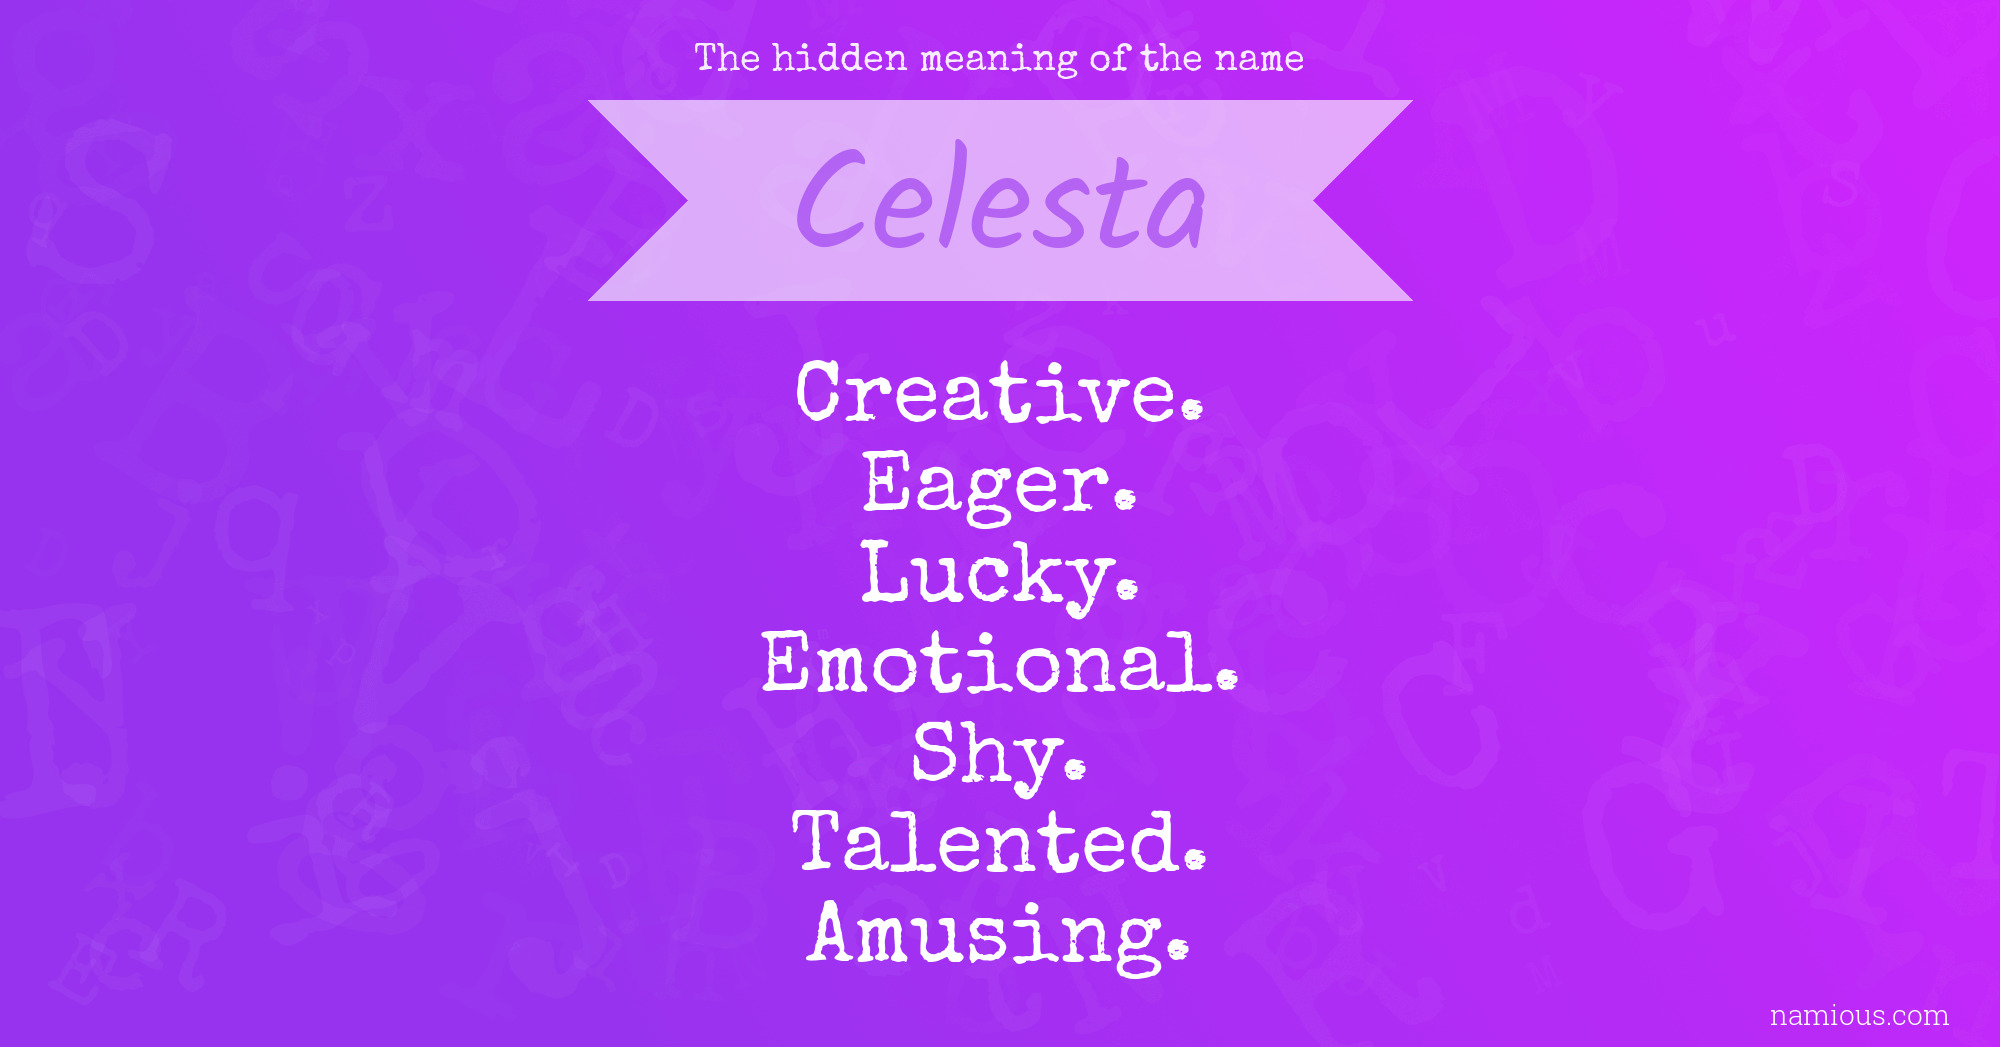 The hidden meaning of the name Celesta